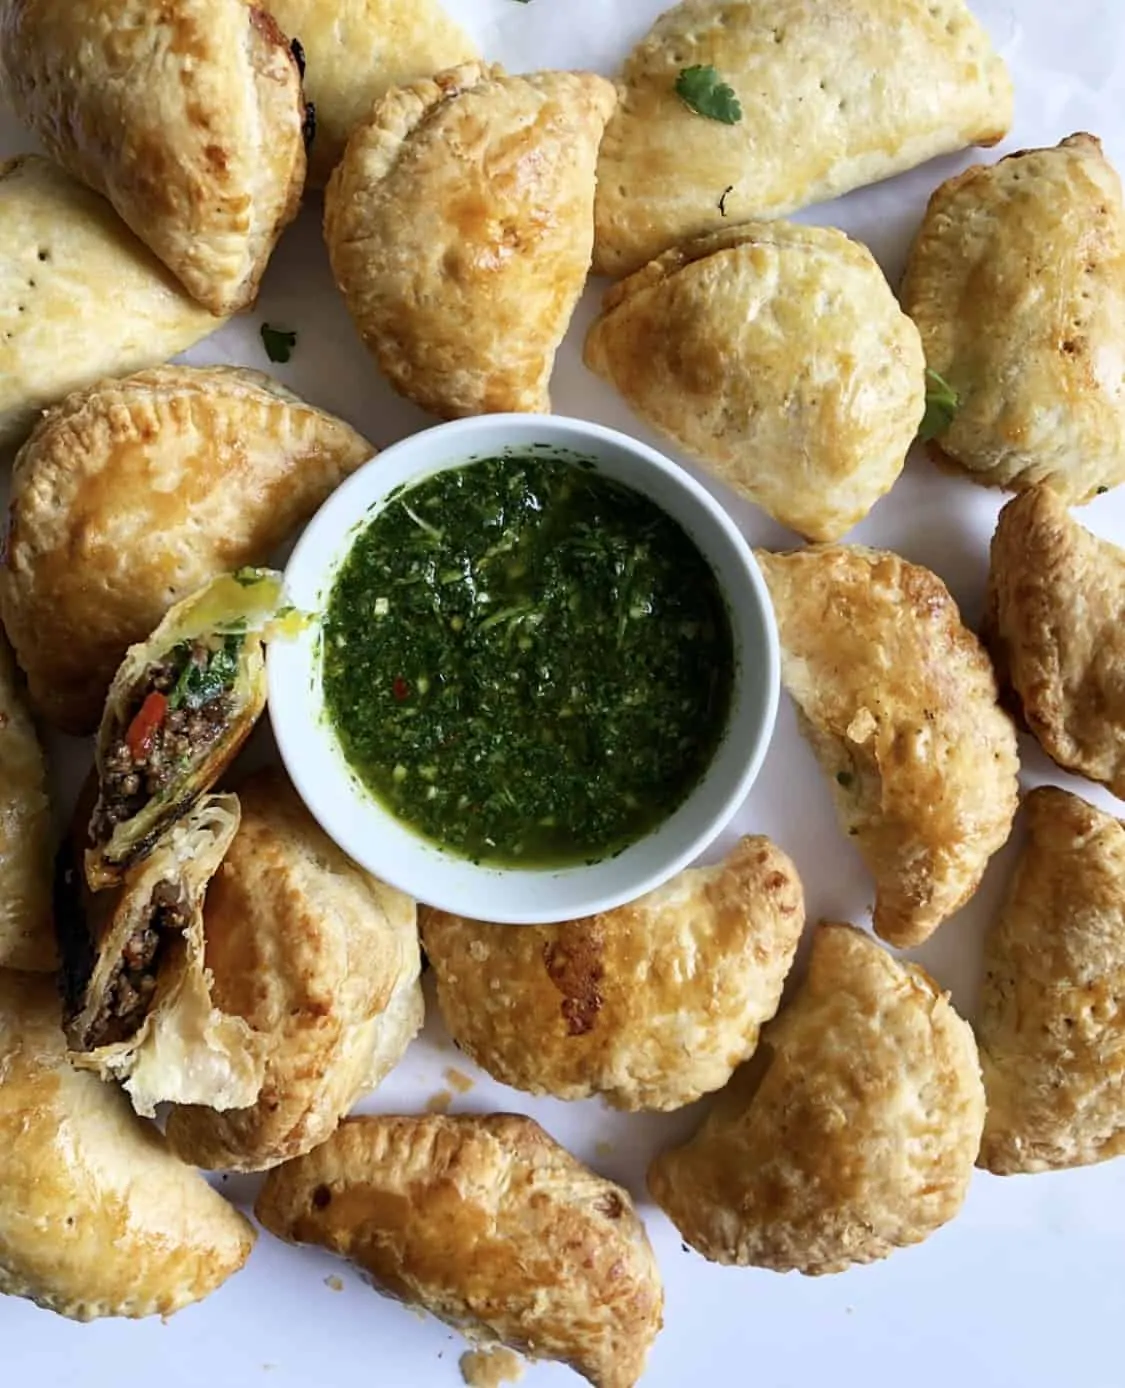 Beef Empanadas with Chimichurri dipping sauce